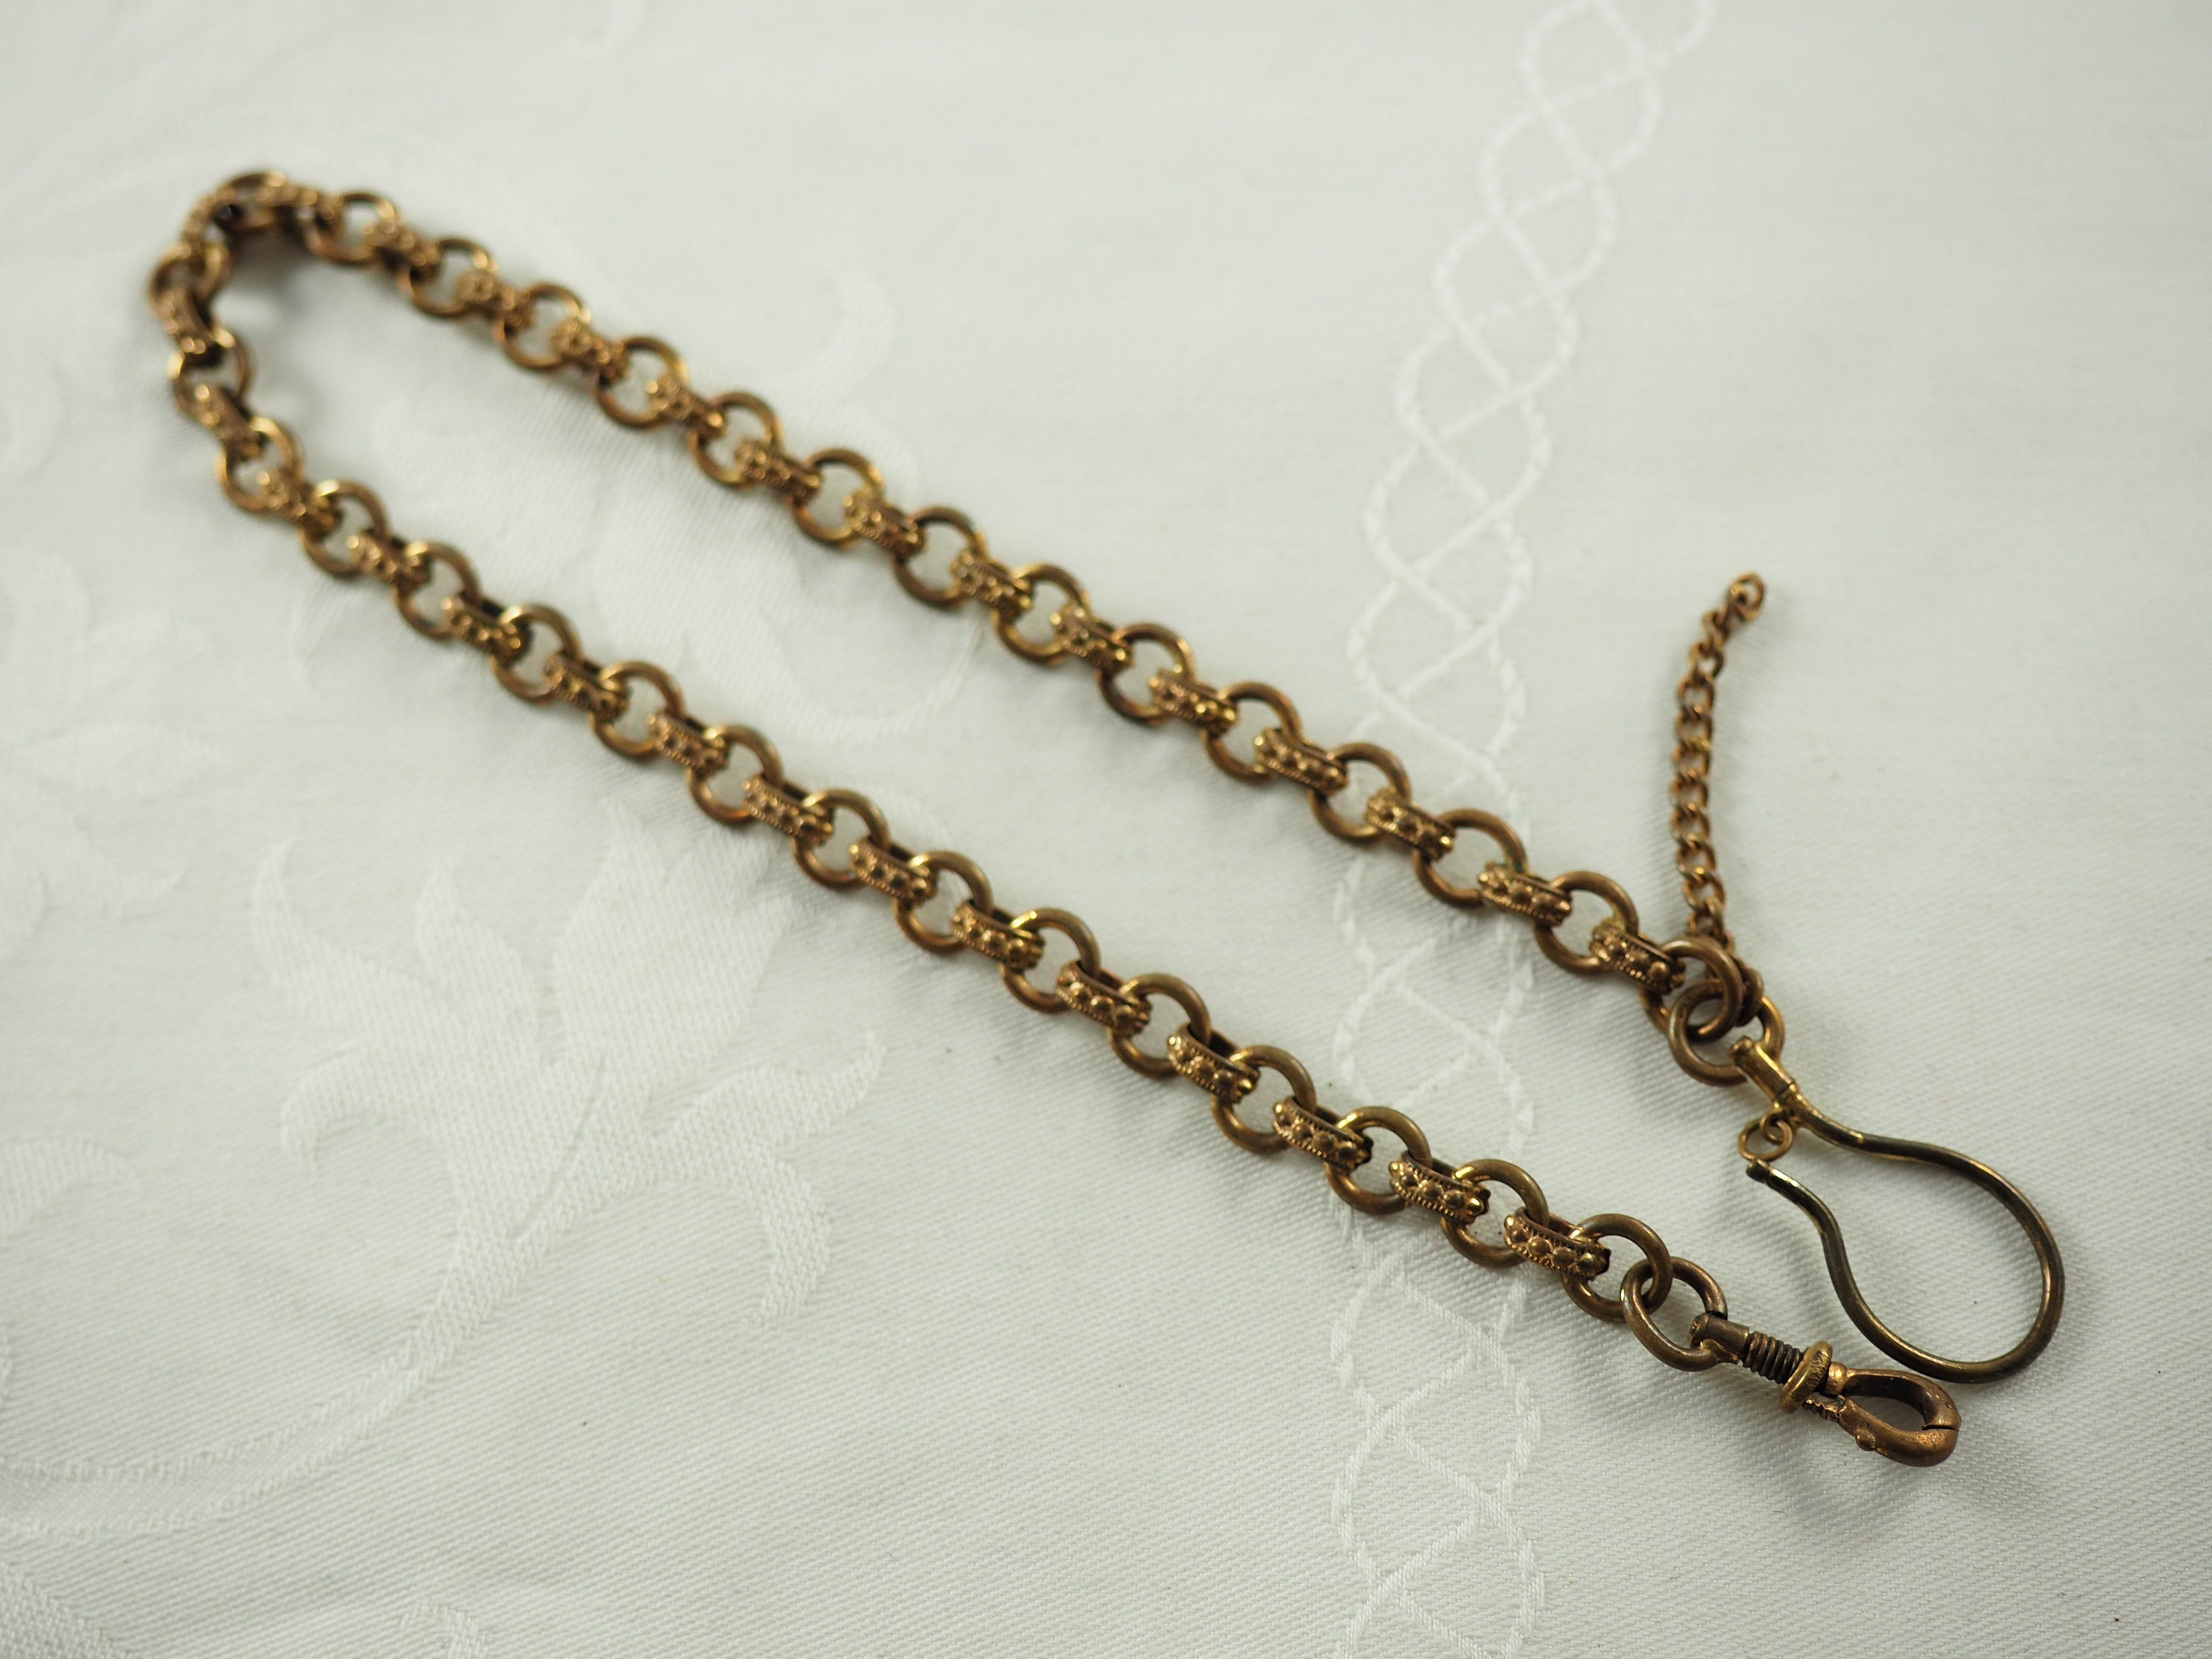 Jewellery Watches Watch Bands & Straps Unmarked Later Spring Ring Very Large Dog Clip Large Links Germany 1890s-1900 Antique Victorian Gold Filled Pocket Watch Chain 